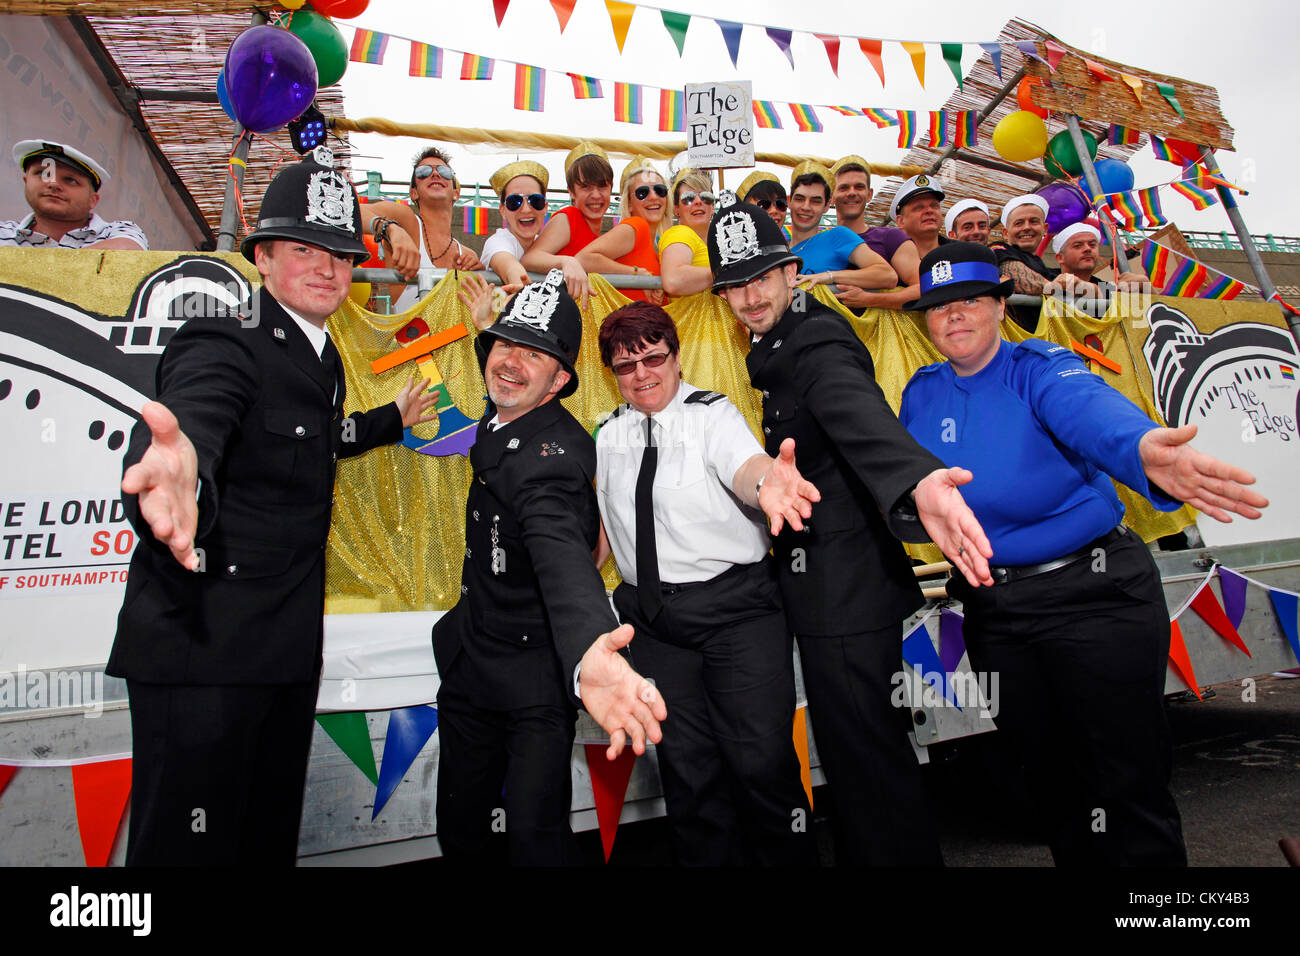 Brighton, UK. 1st September 2012. Police with marchers in the Brighton Gay Pride Parade 2012 in Brighton, England Stock Photo